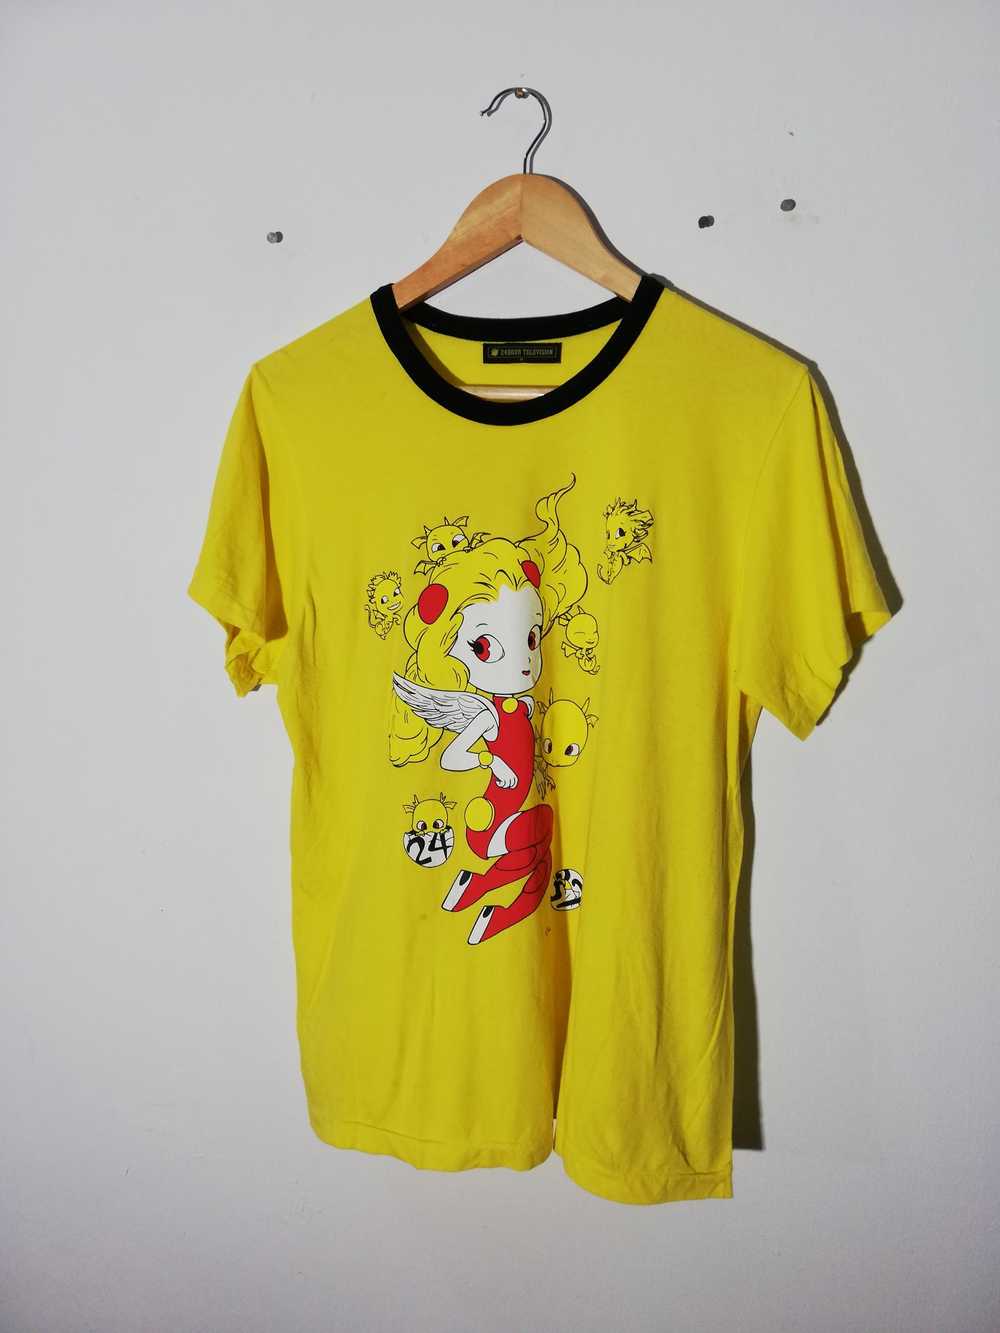 Japanese Brand 24 Hour Television Tee - image 1